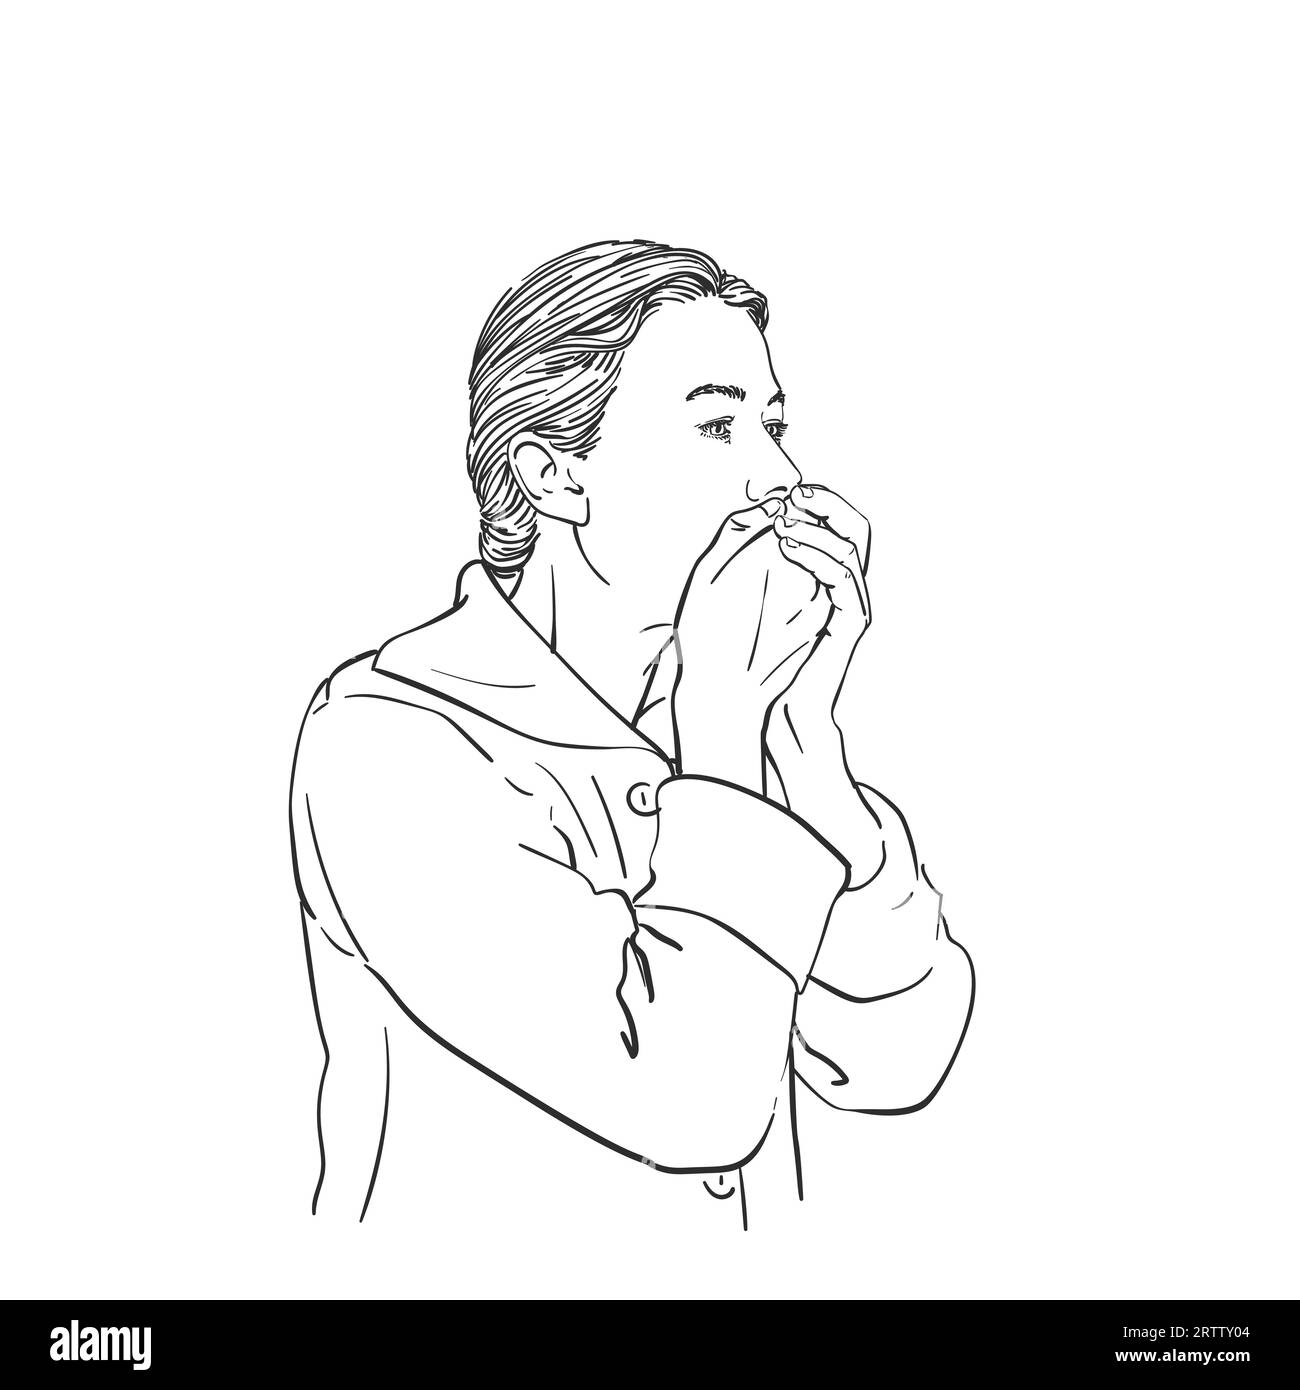 Sketch Of Coughing Woman Covering Her Mouth With Hands Hand Drawn Vector Illustration Stock